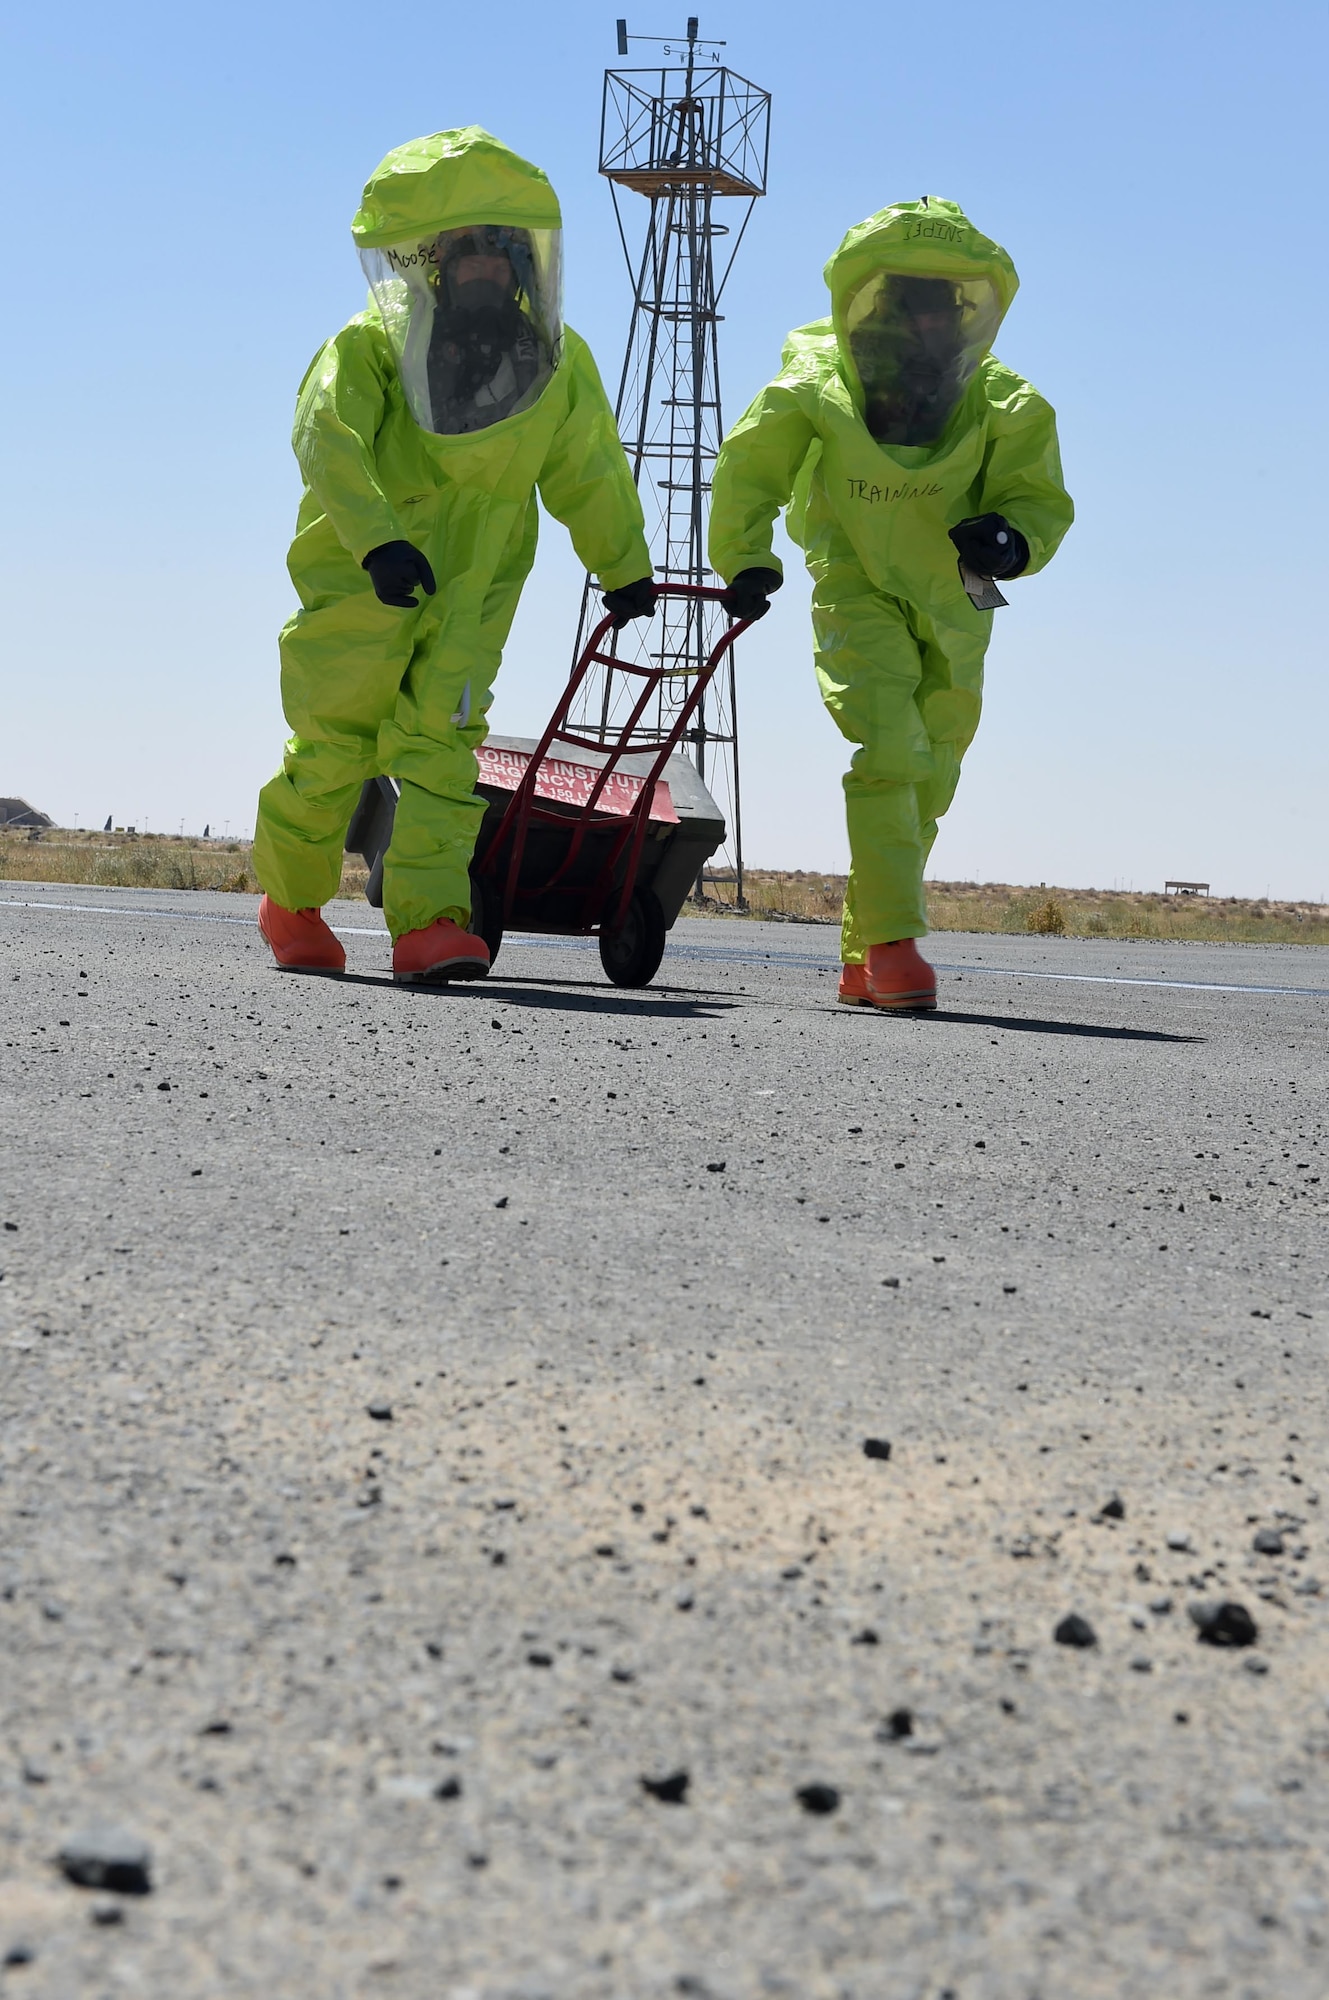 A firefighter from the 386th Expeditionary Civil Engineer Squadron and a firefighter from the 332nd ECES respond to a simulated chlorine gas leak during a Hazardous Materials Technician Certification course exercise at an undisclosed location in Southwest Asia, April 15, 2016. Fire department, emergency management and medical teams from the two wings participated in the exercise which tested their knowledge and skills in safely recognizing and mitigating a hazardous material accident. (U.S. Air Force photo by Staff Sgt. Jerilyn Quintanilla)